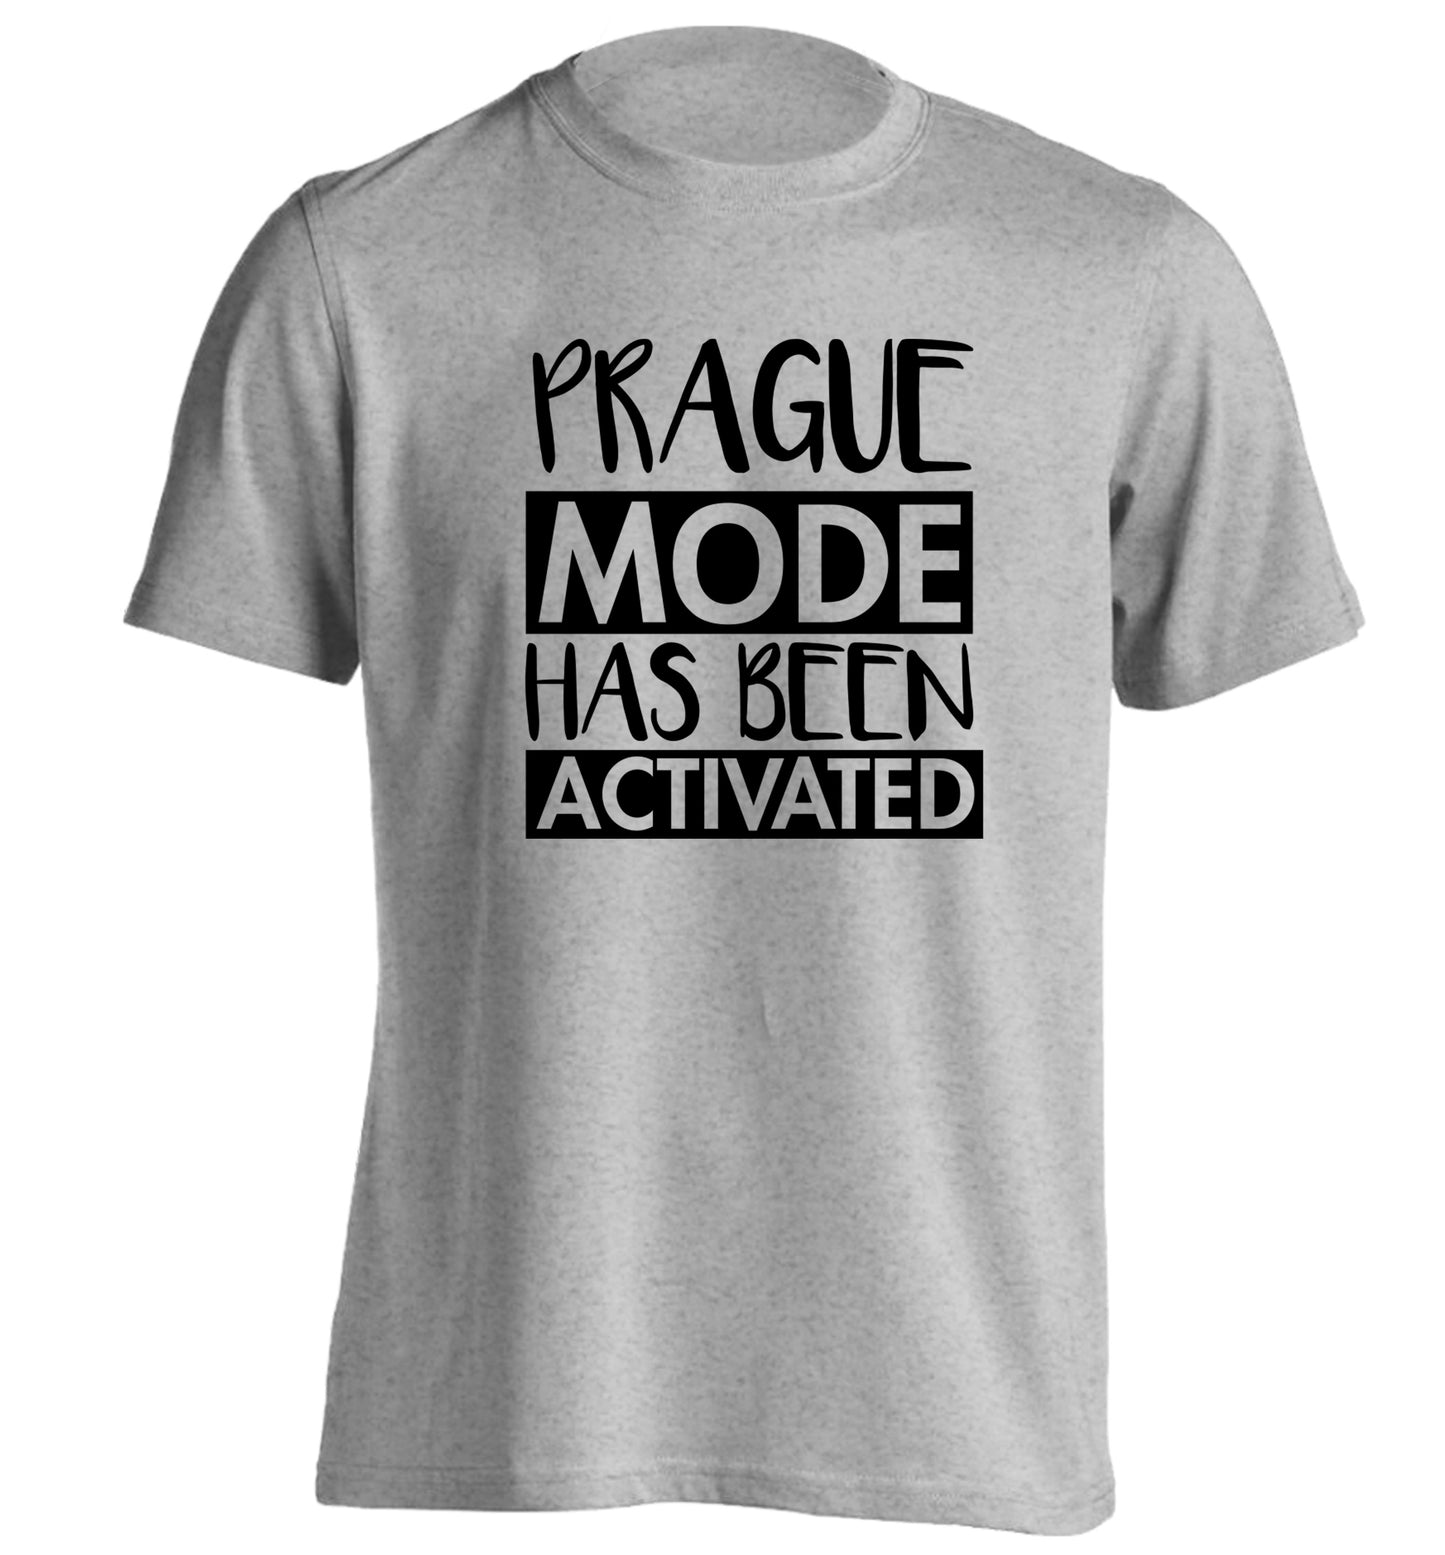 Prague mode has been activated adults unisex grey Tshirt 2XL